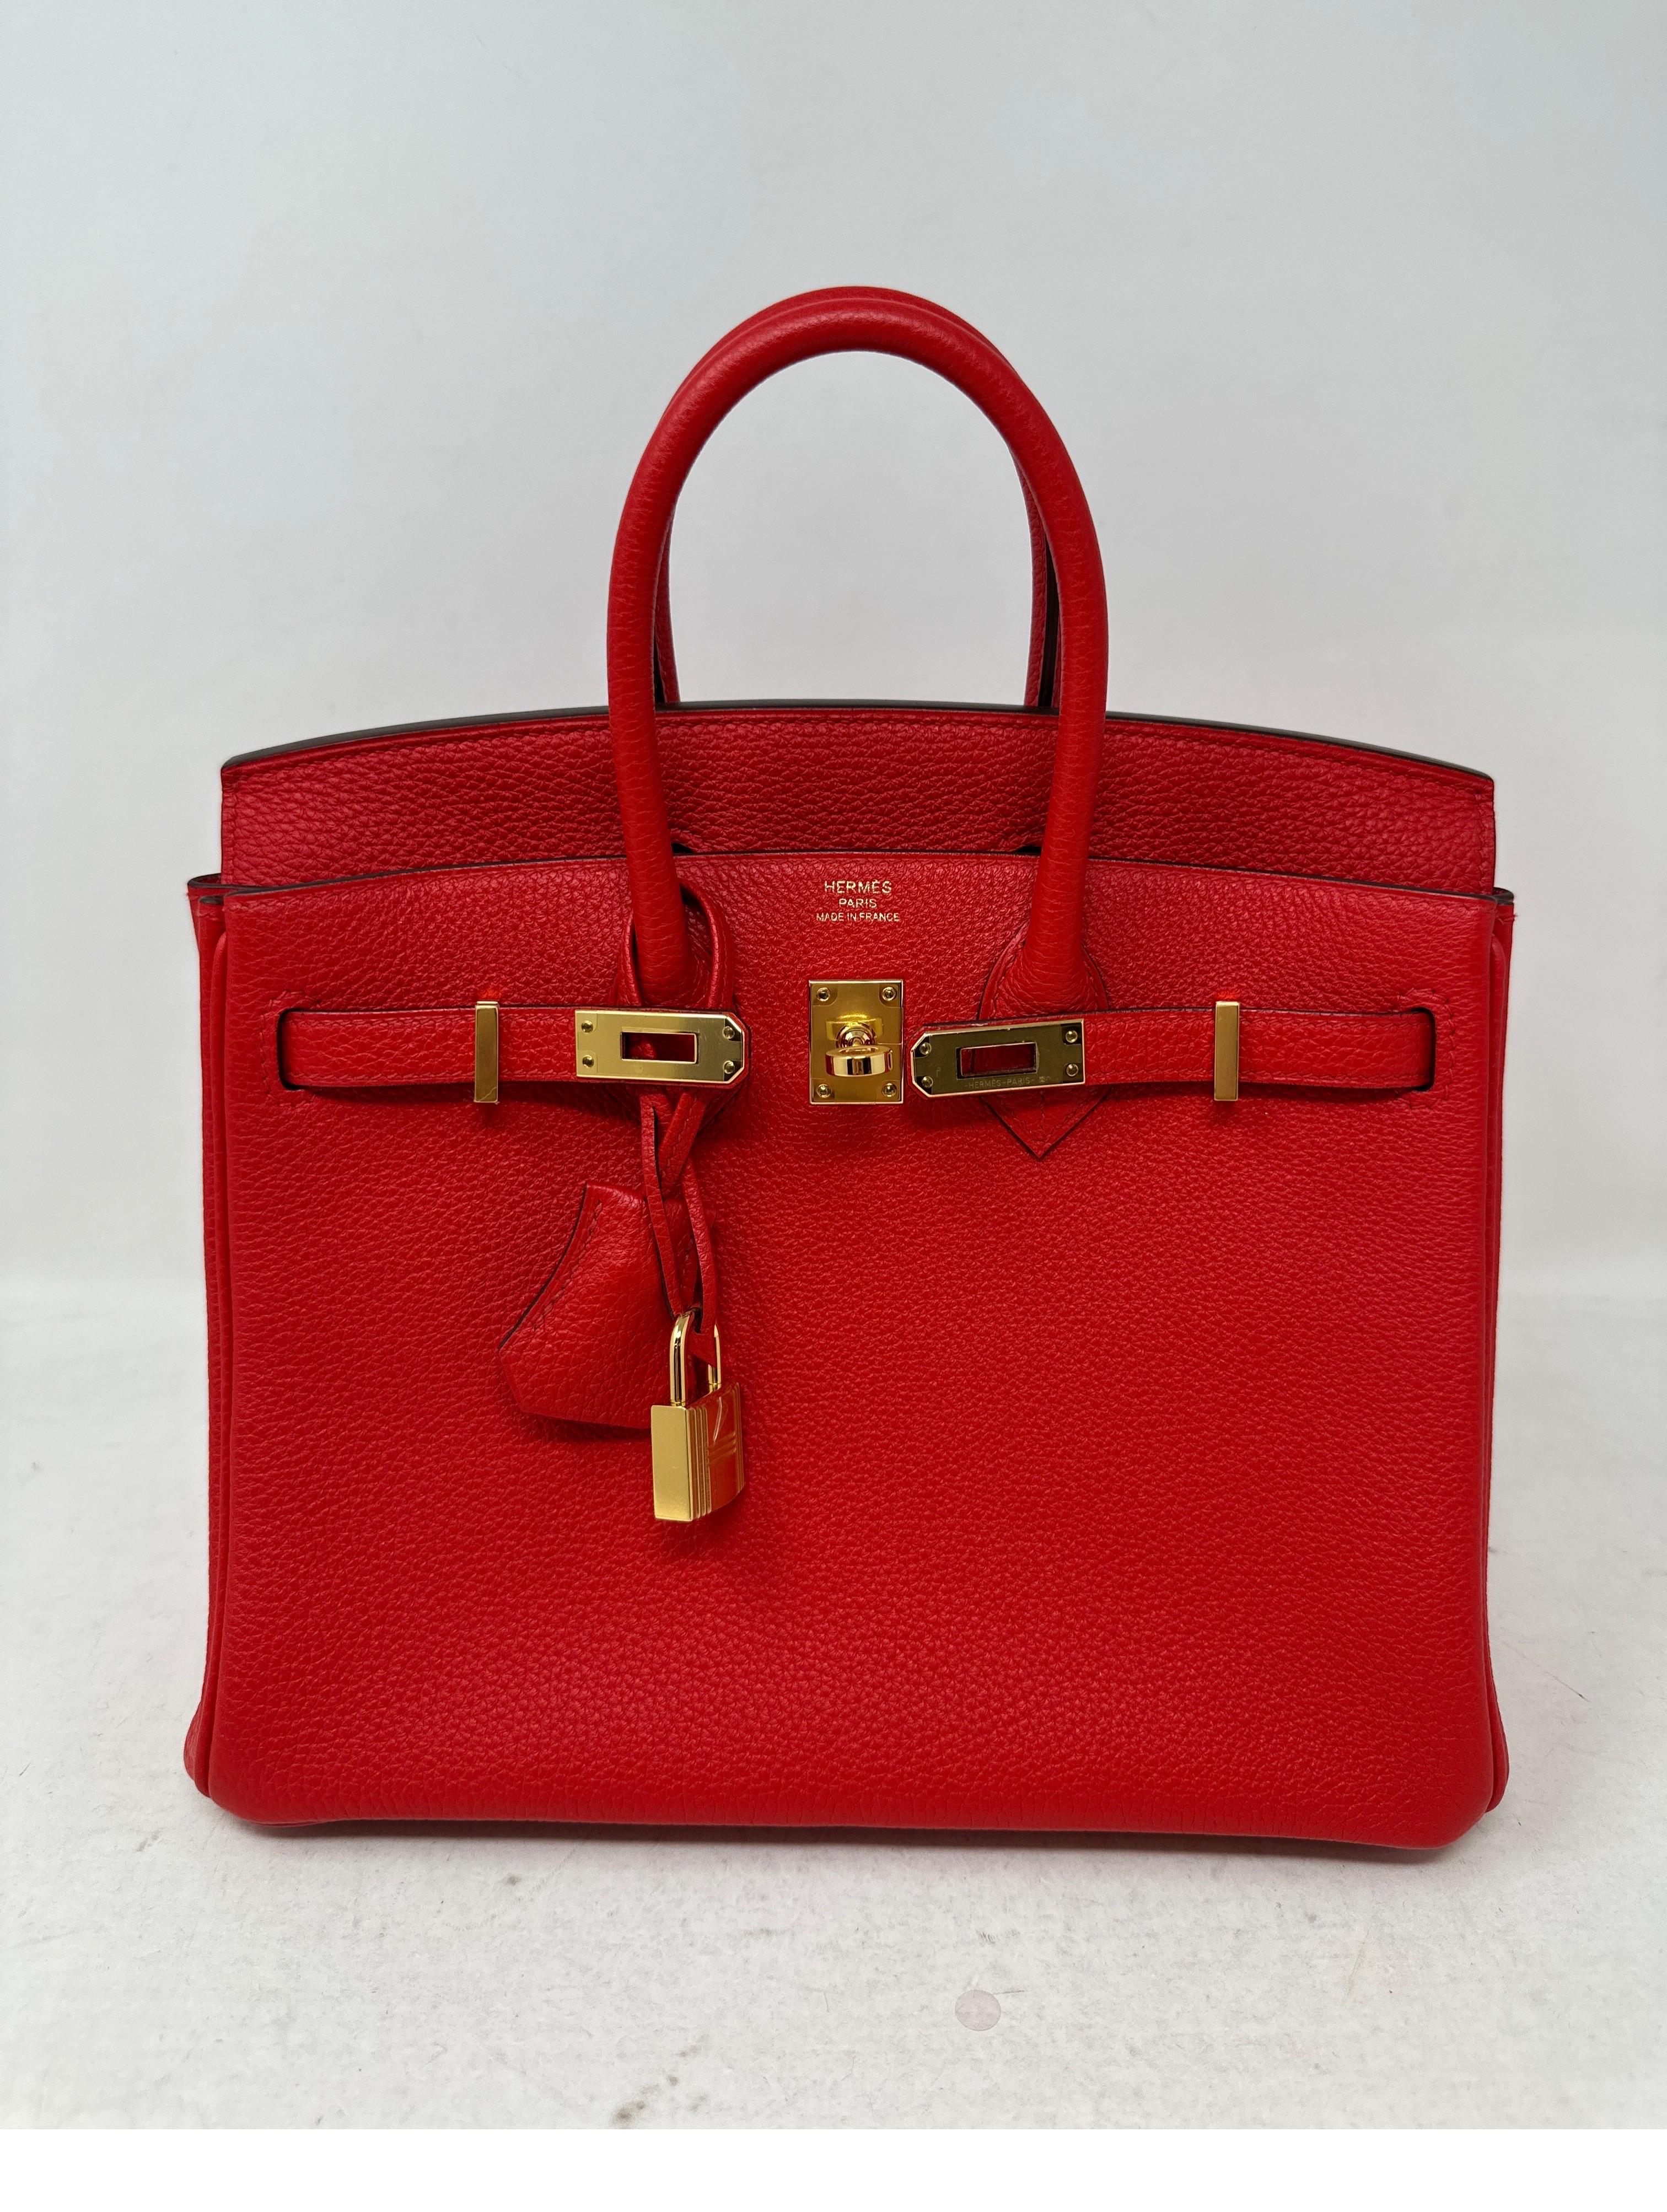 Hermes Rouge De Coeur Birkin 25 Bag. Mint like new condition. Gold hardware. Rare mini size 25 Birkin bag. Great investment bag. Interior clean. Includes clochette, lock, keys, and dust bag. Guaranteed authentic. 